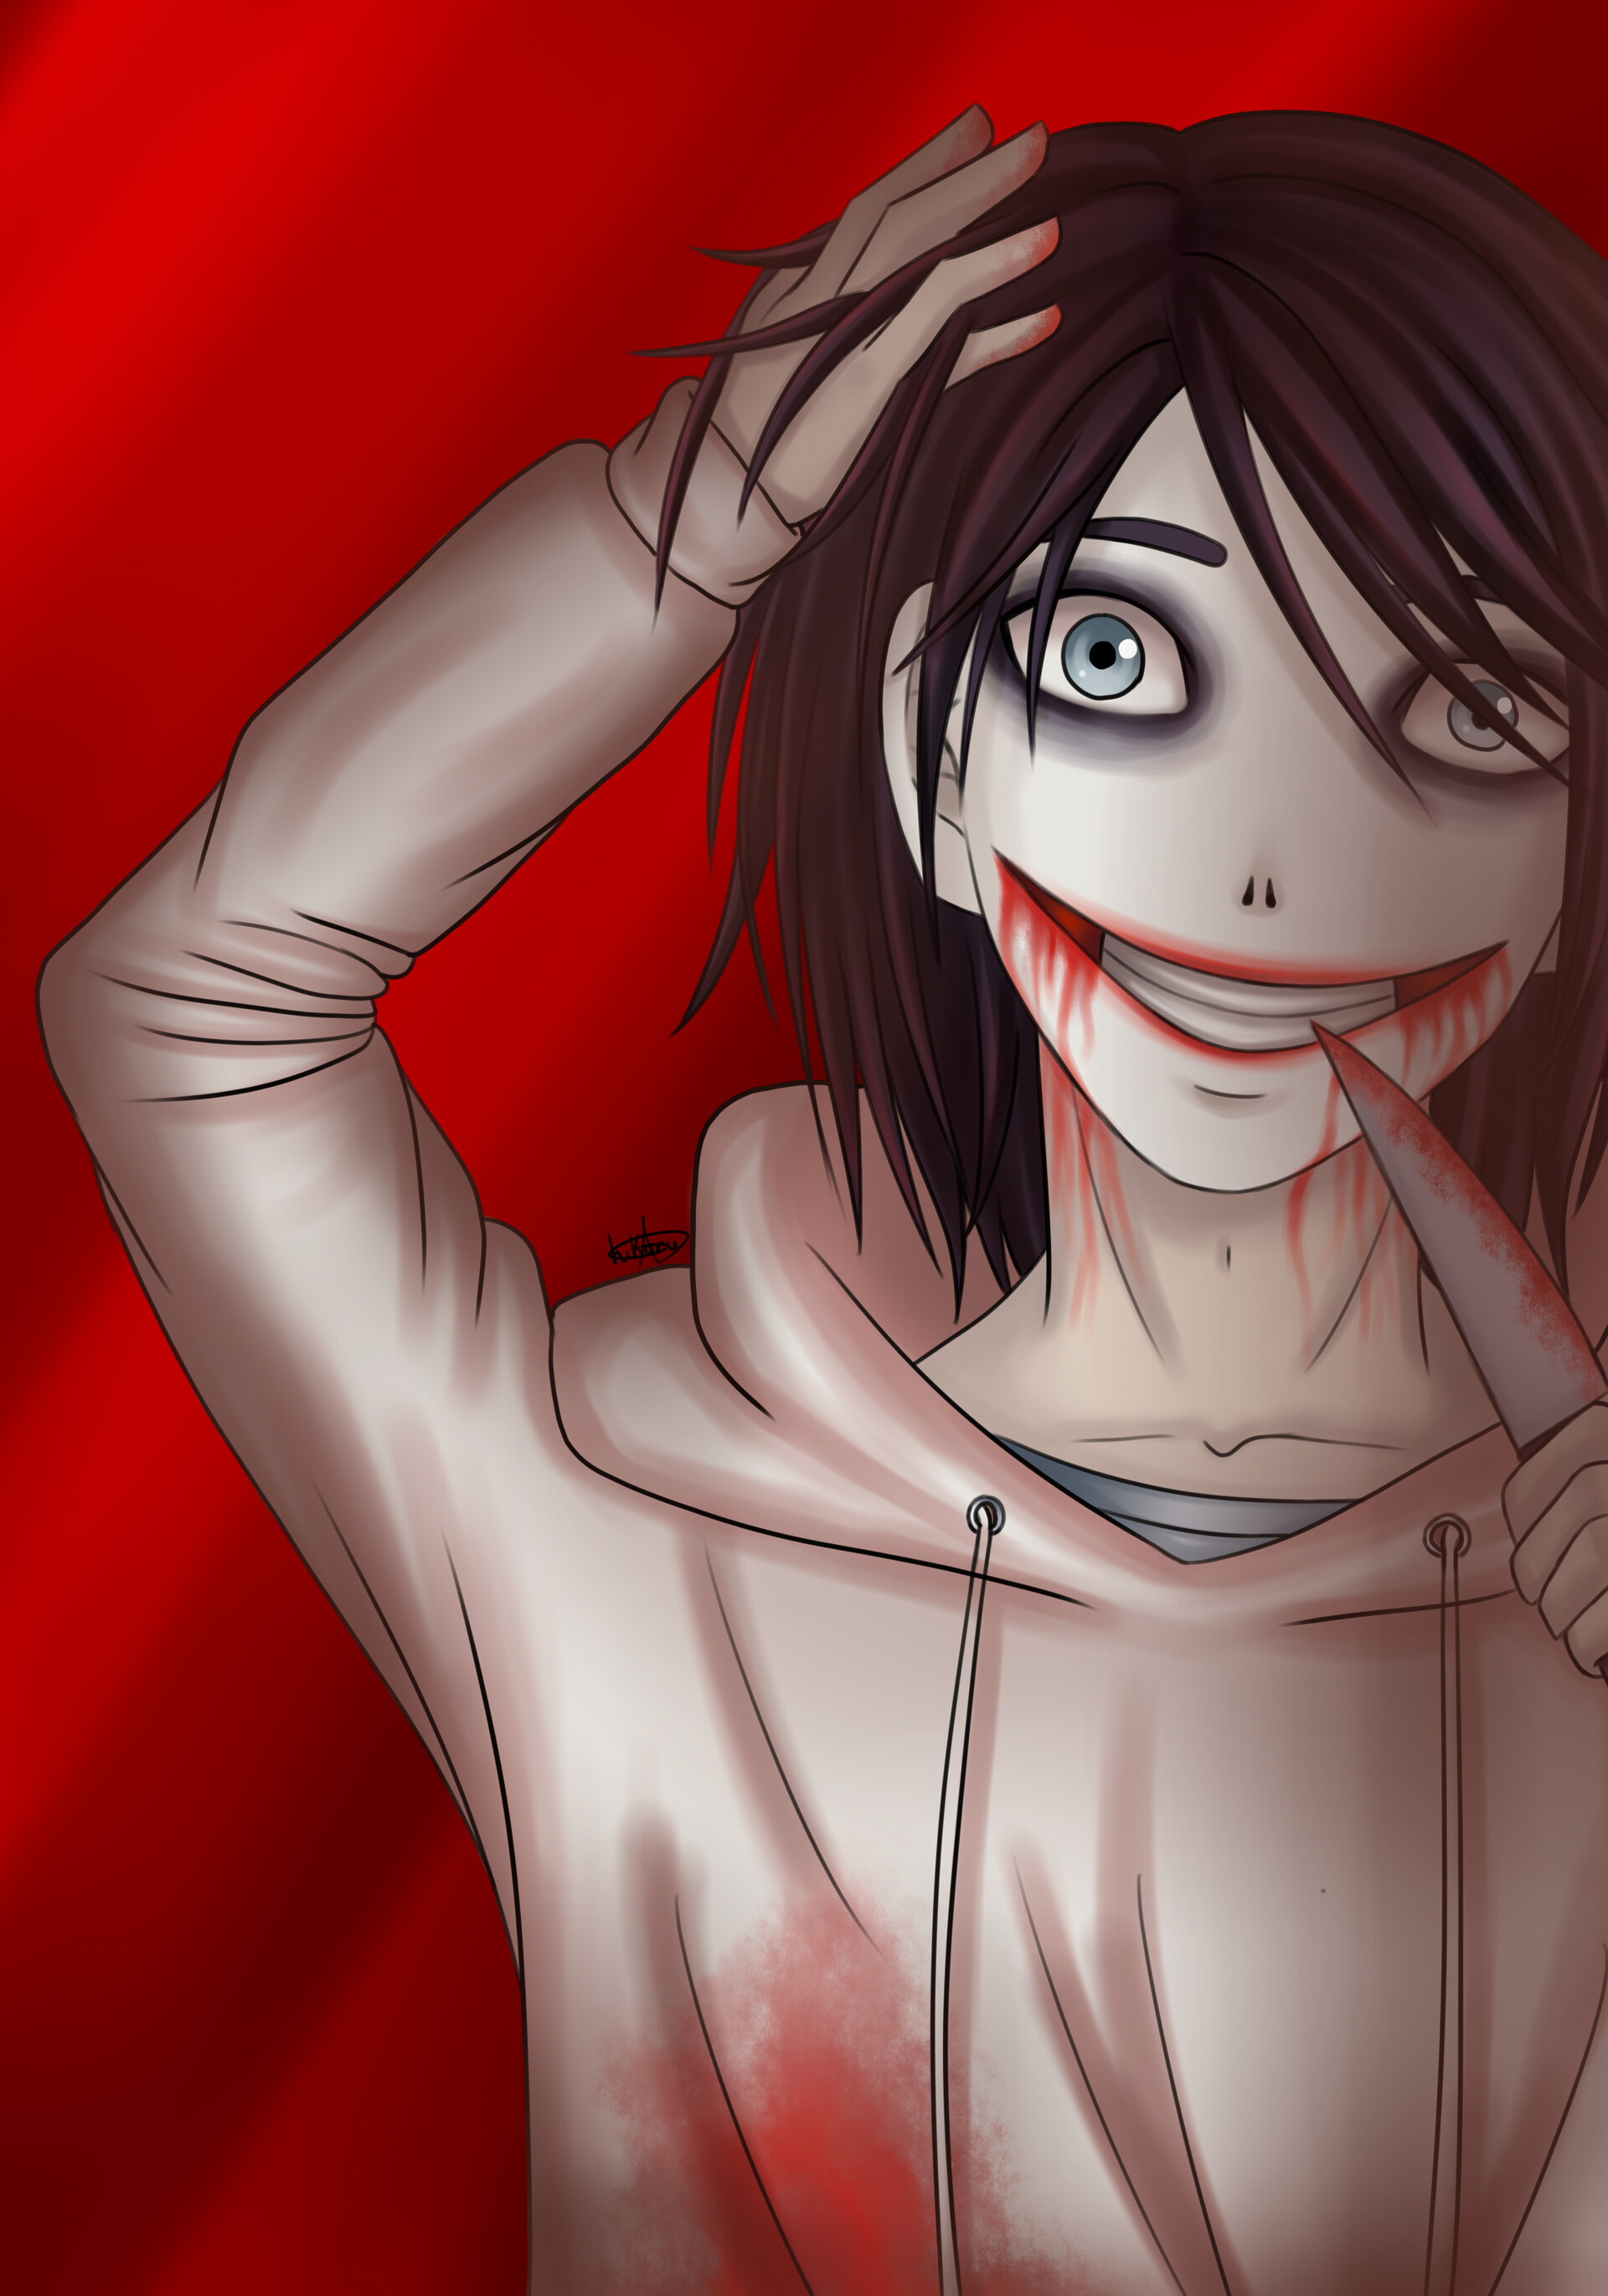 100+] Jeff The Killer Pictures | Wallpapers.com